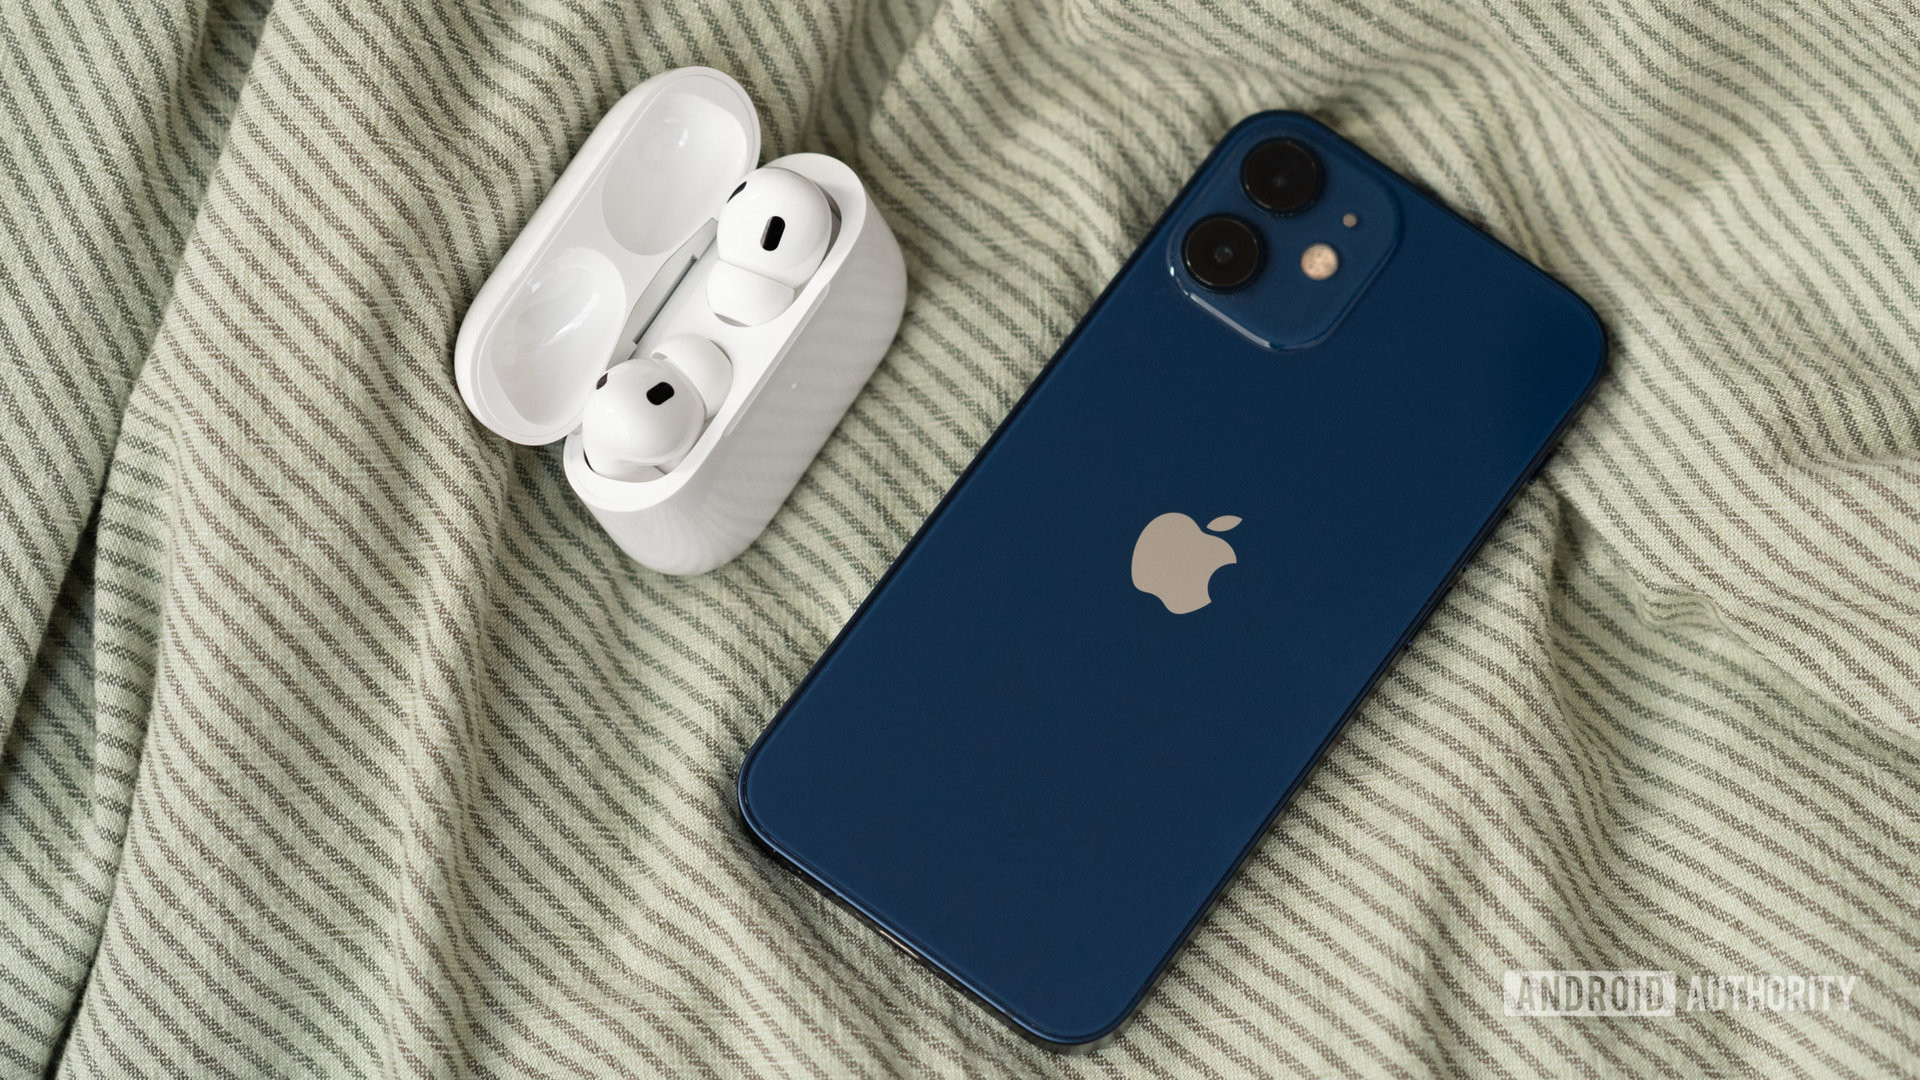 The Apple AirPods Pro (2nd generation) case open with the earbuds next to an iPhone 12 mini.